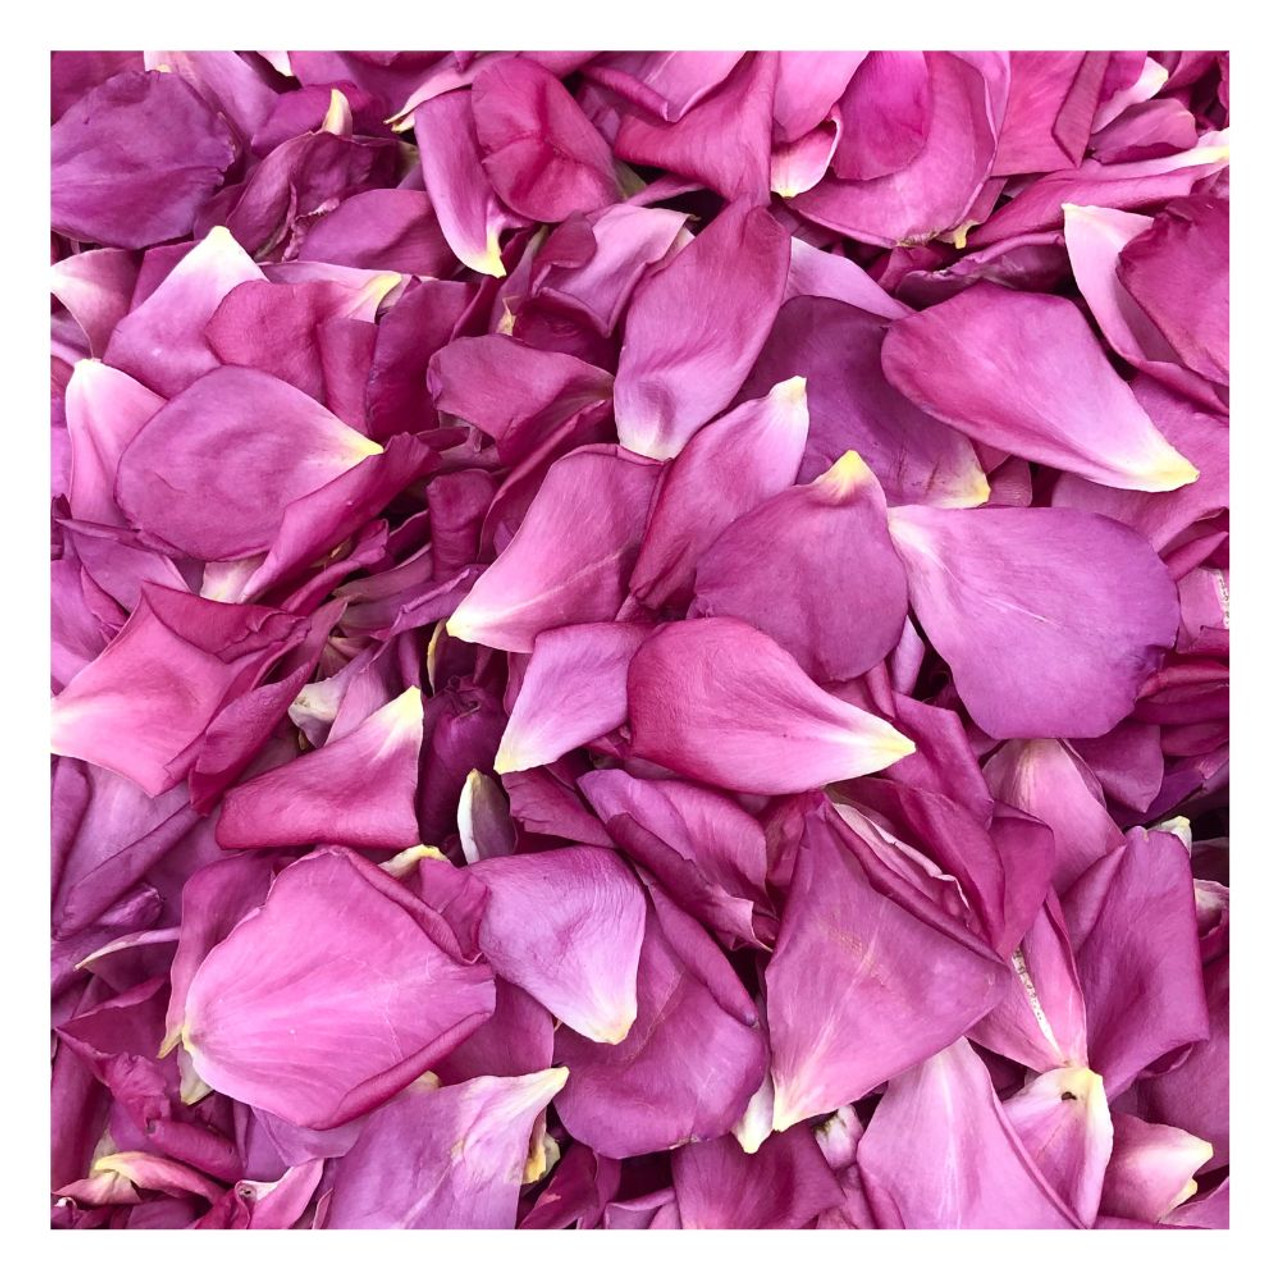 All American Beauty Freeze-dried Real Rose Petals Wedding Petals. Grown in  Oregon USA